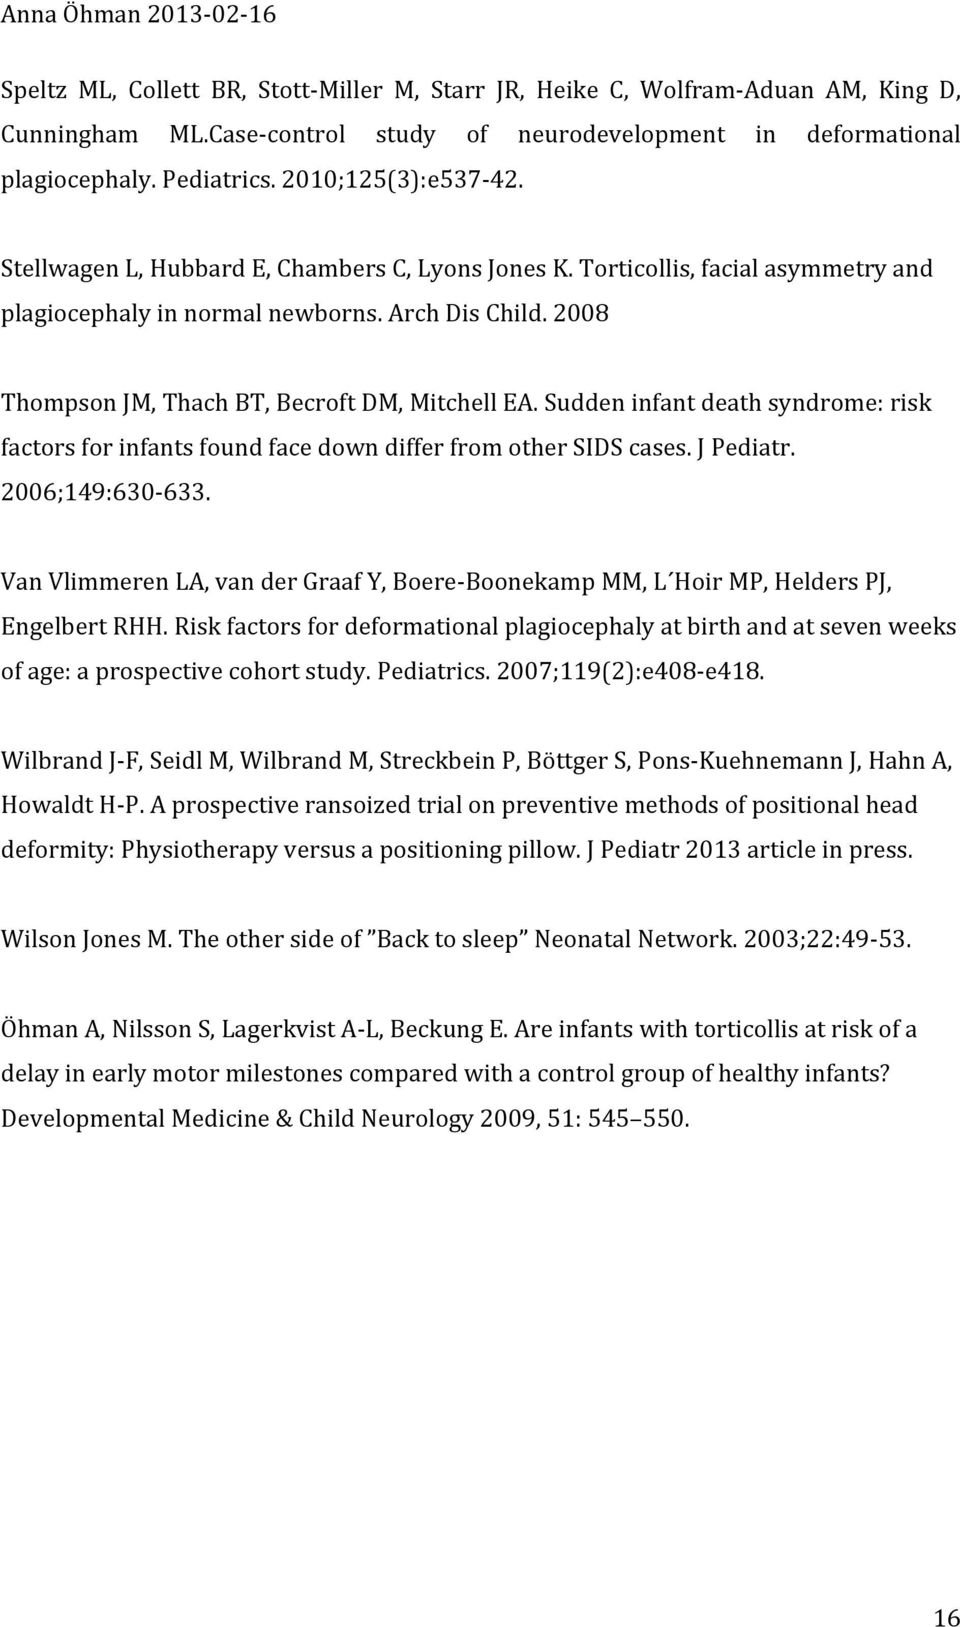 2008 Thompson JM, Thach BT, Becroft DM, Mitchell EA. Sudden infant death syndrome: risk factors for infants found face down differ from other SIDS cases. J Pediatr. 2006;149:630-633.